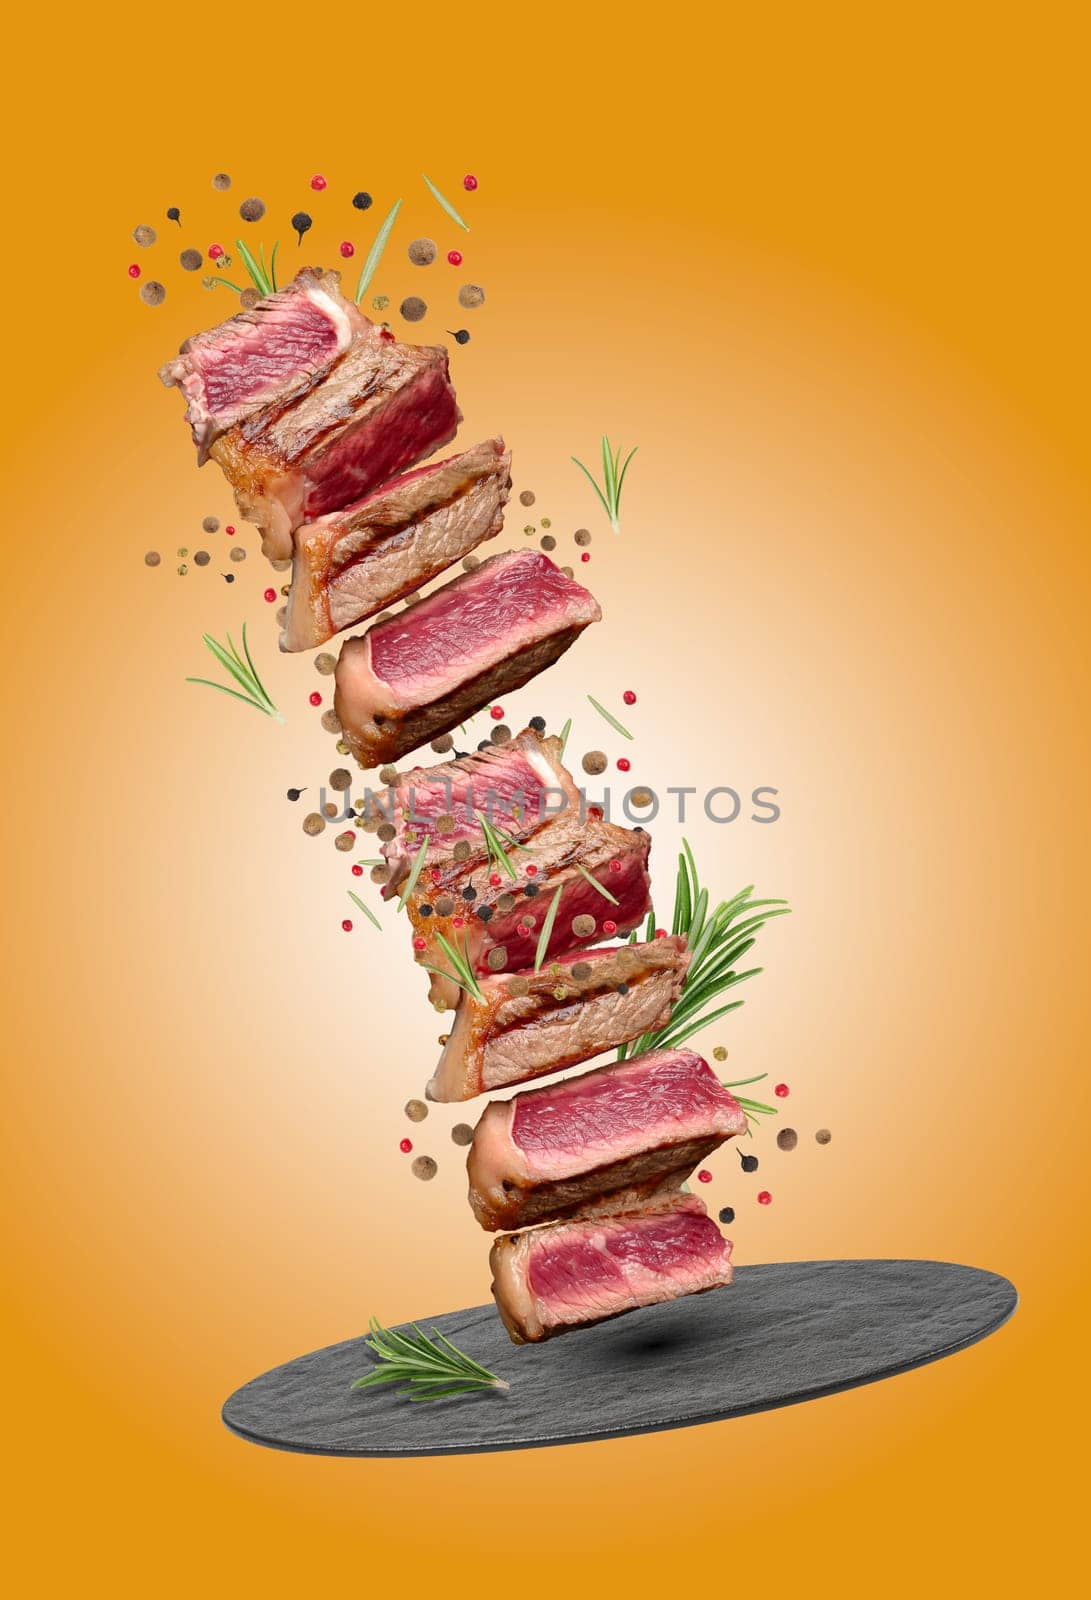 Sliced fried beef steak New York with spices and a sprig of rosemary, degree of doneness rare